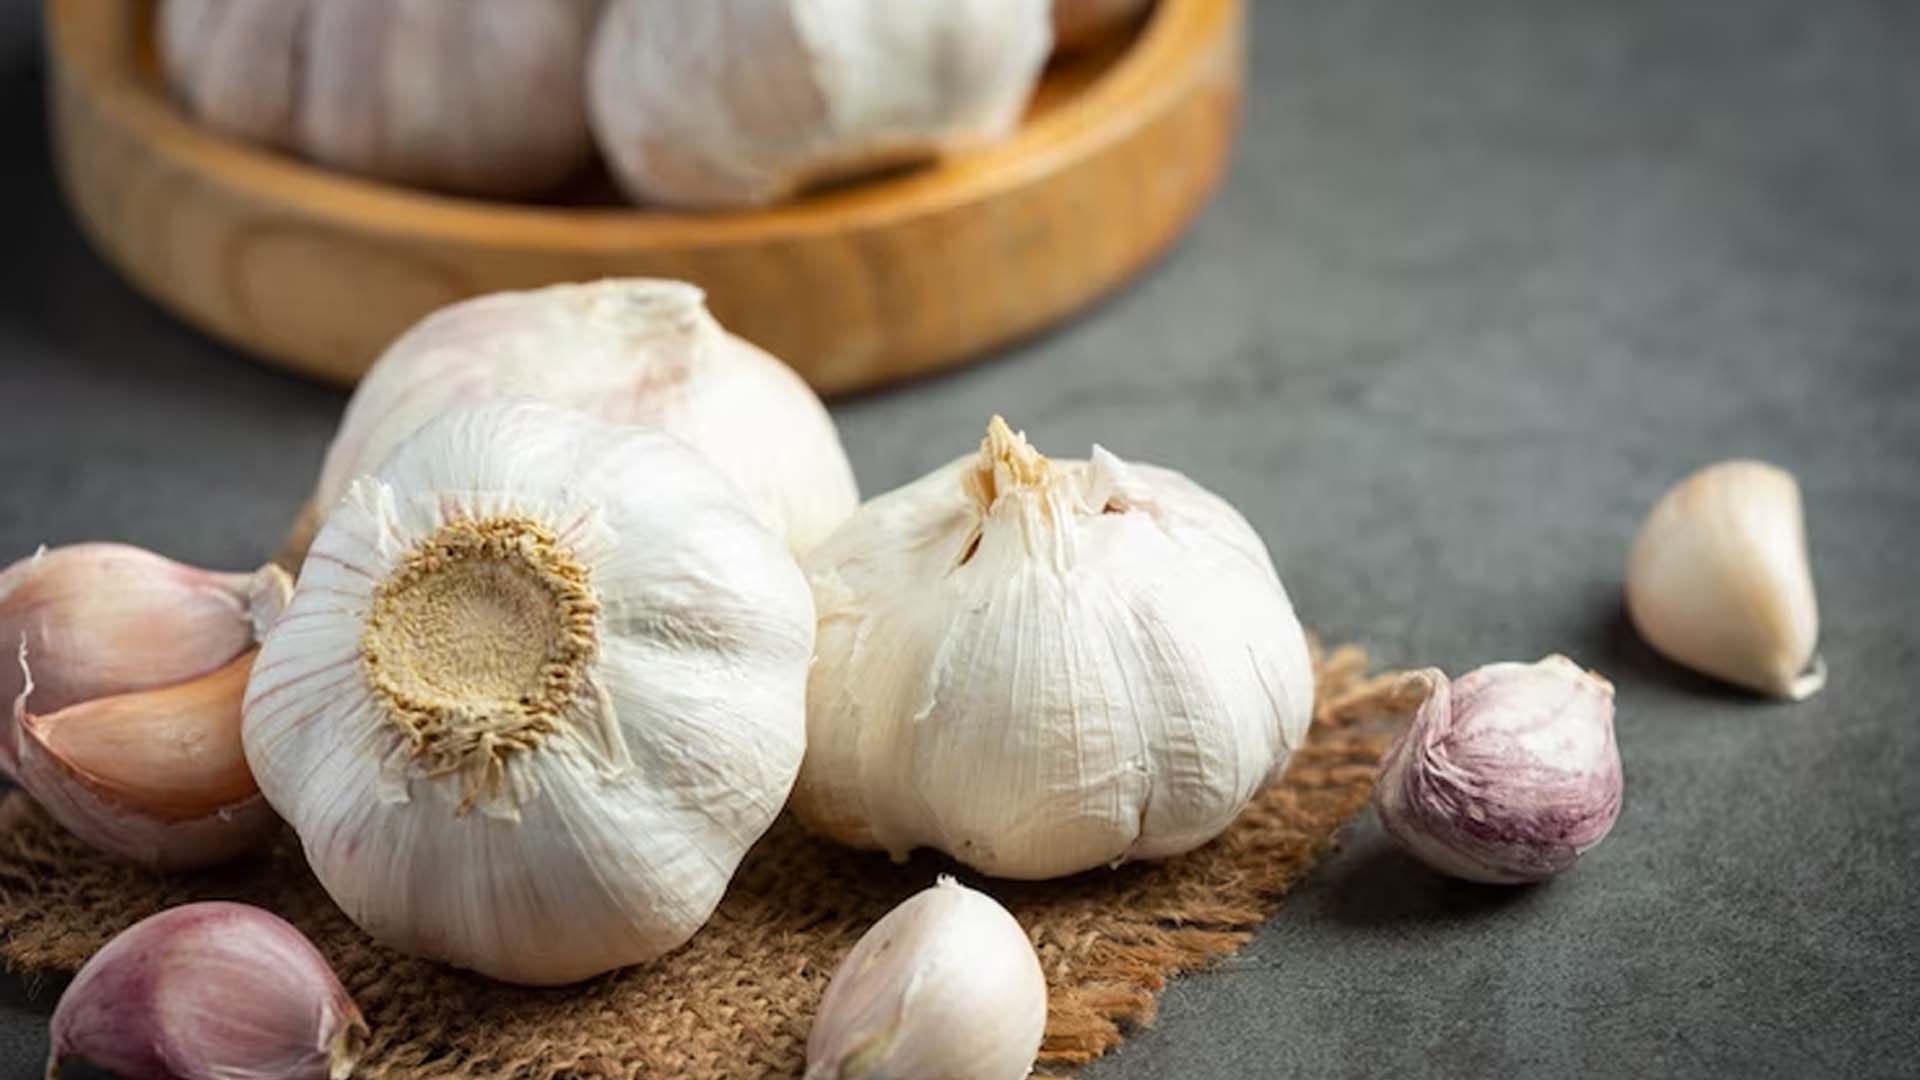 When to Eat Garlic for Health Benefits?